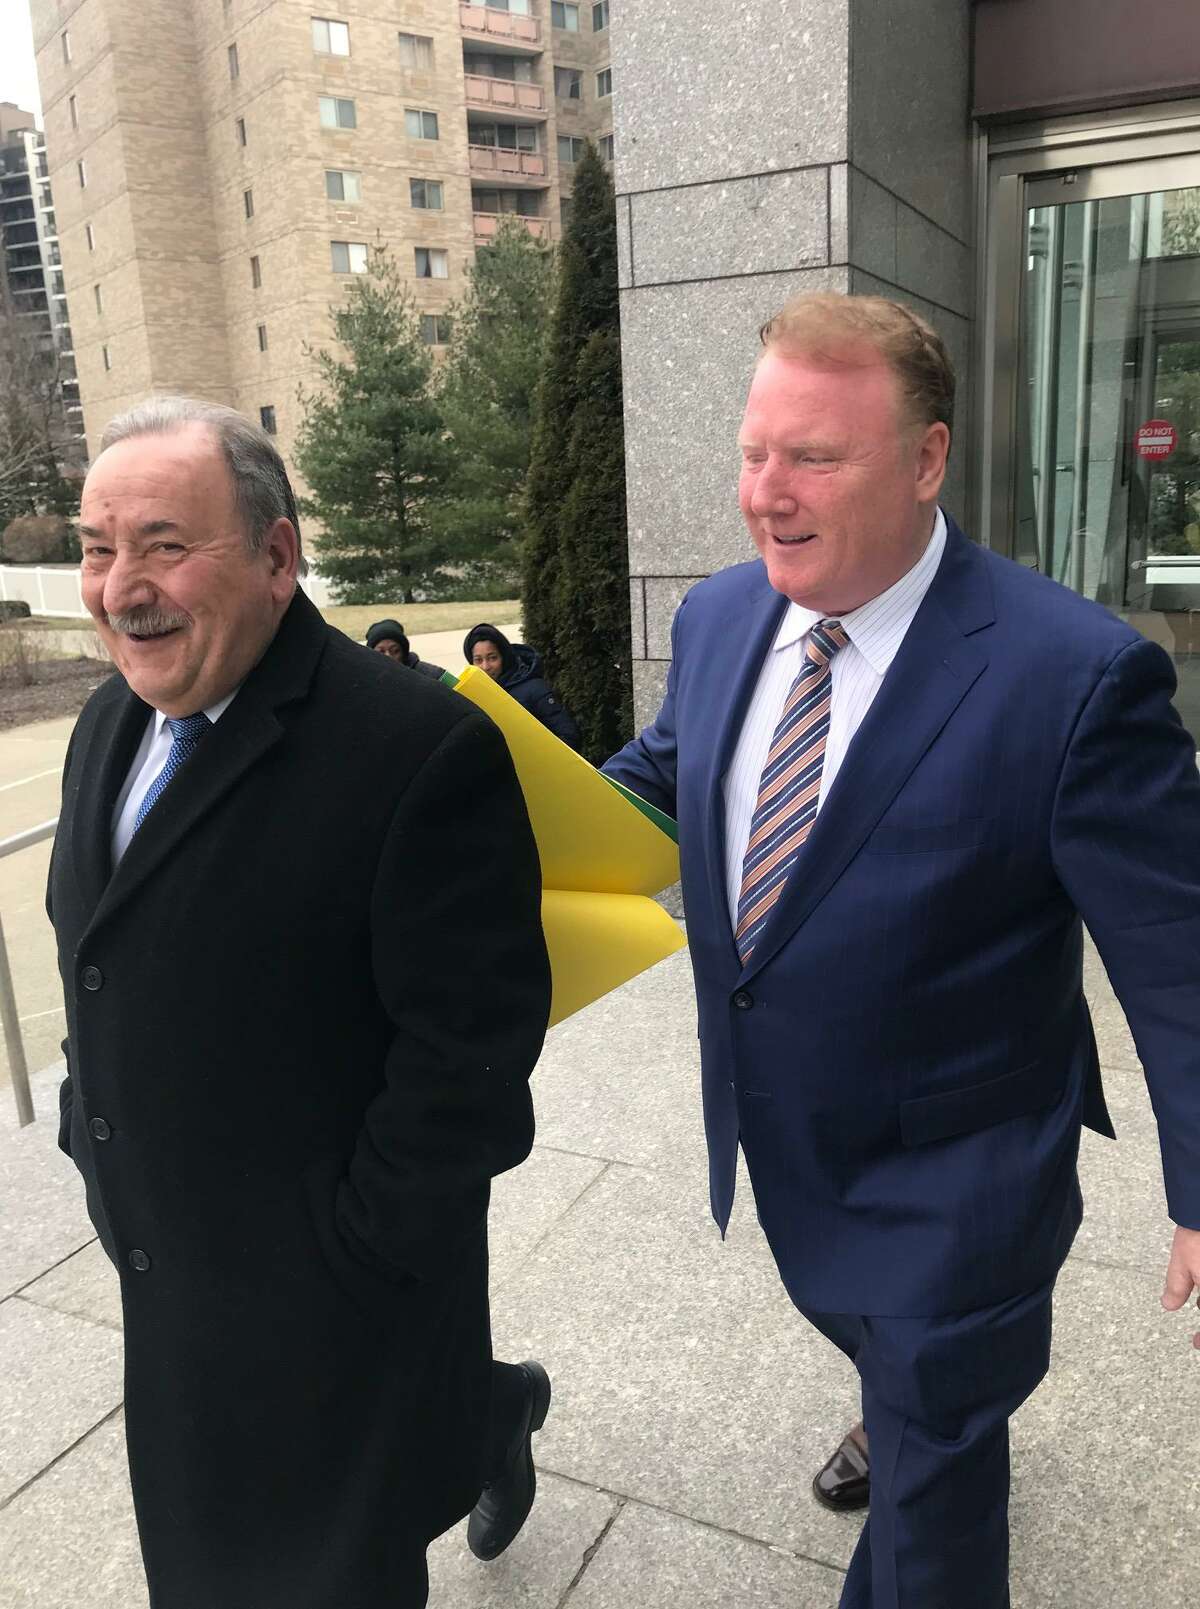 John Mallozzi (left) leaves the Stamford courthouse with his attorney, Stephan Seeger, in 2019.